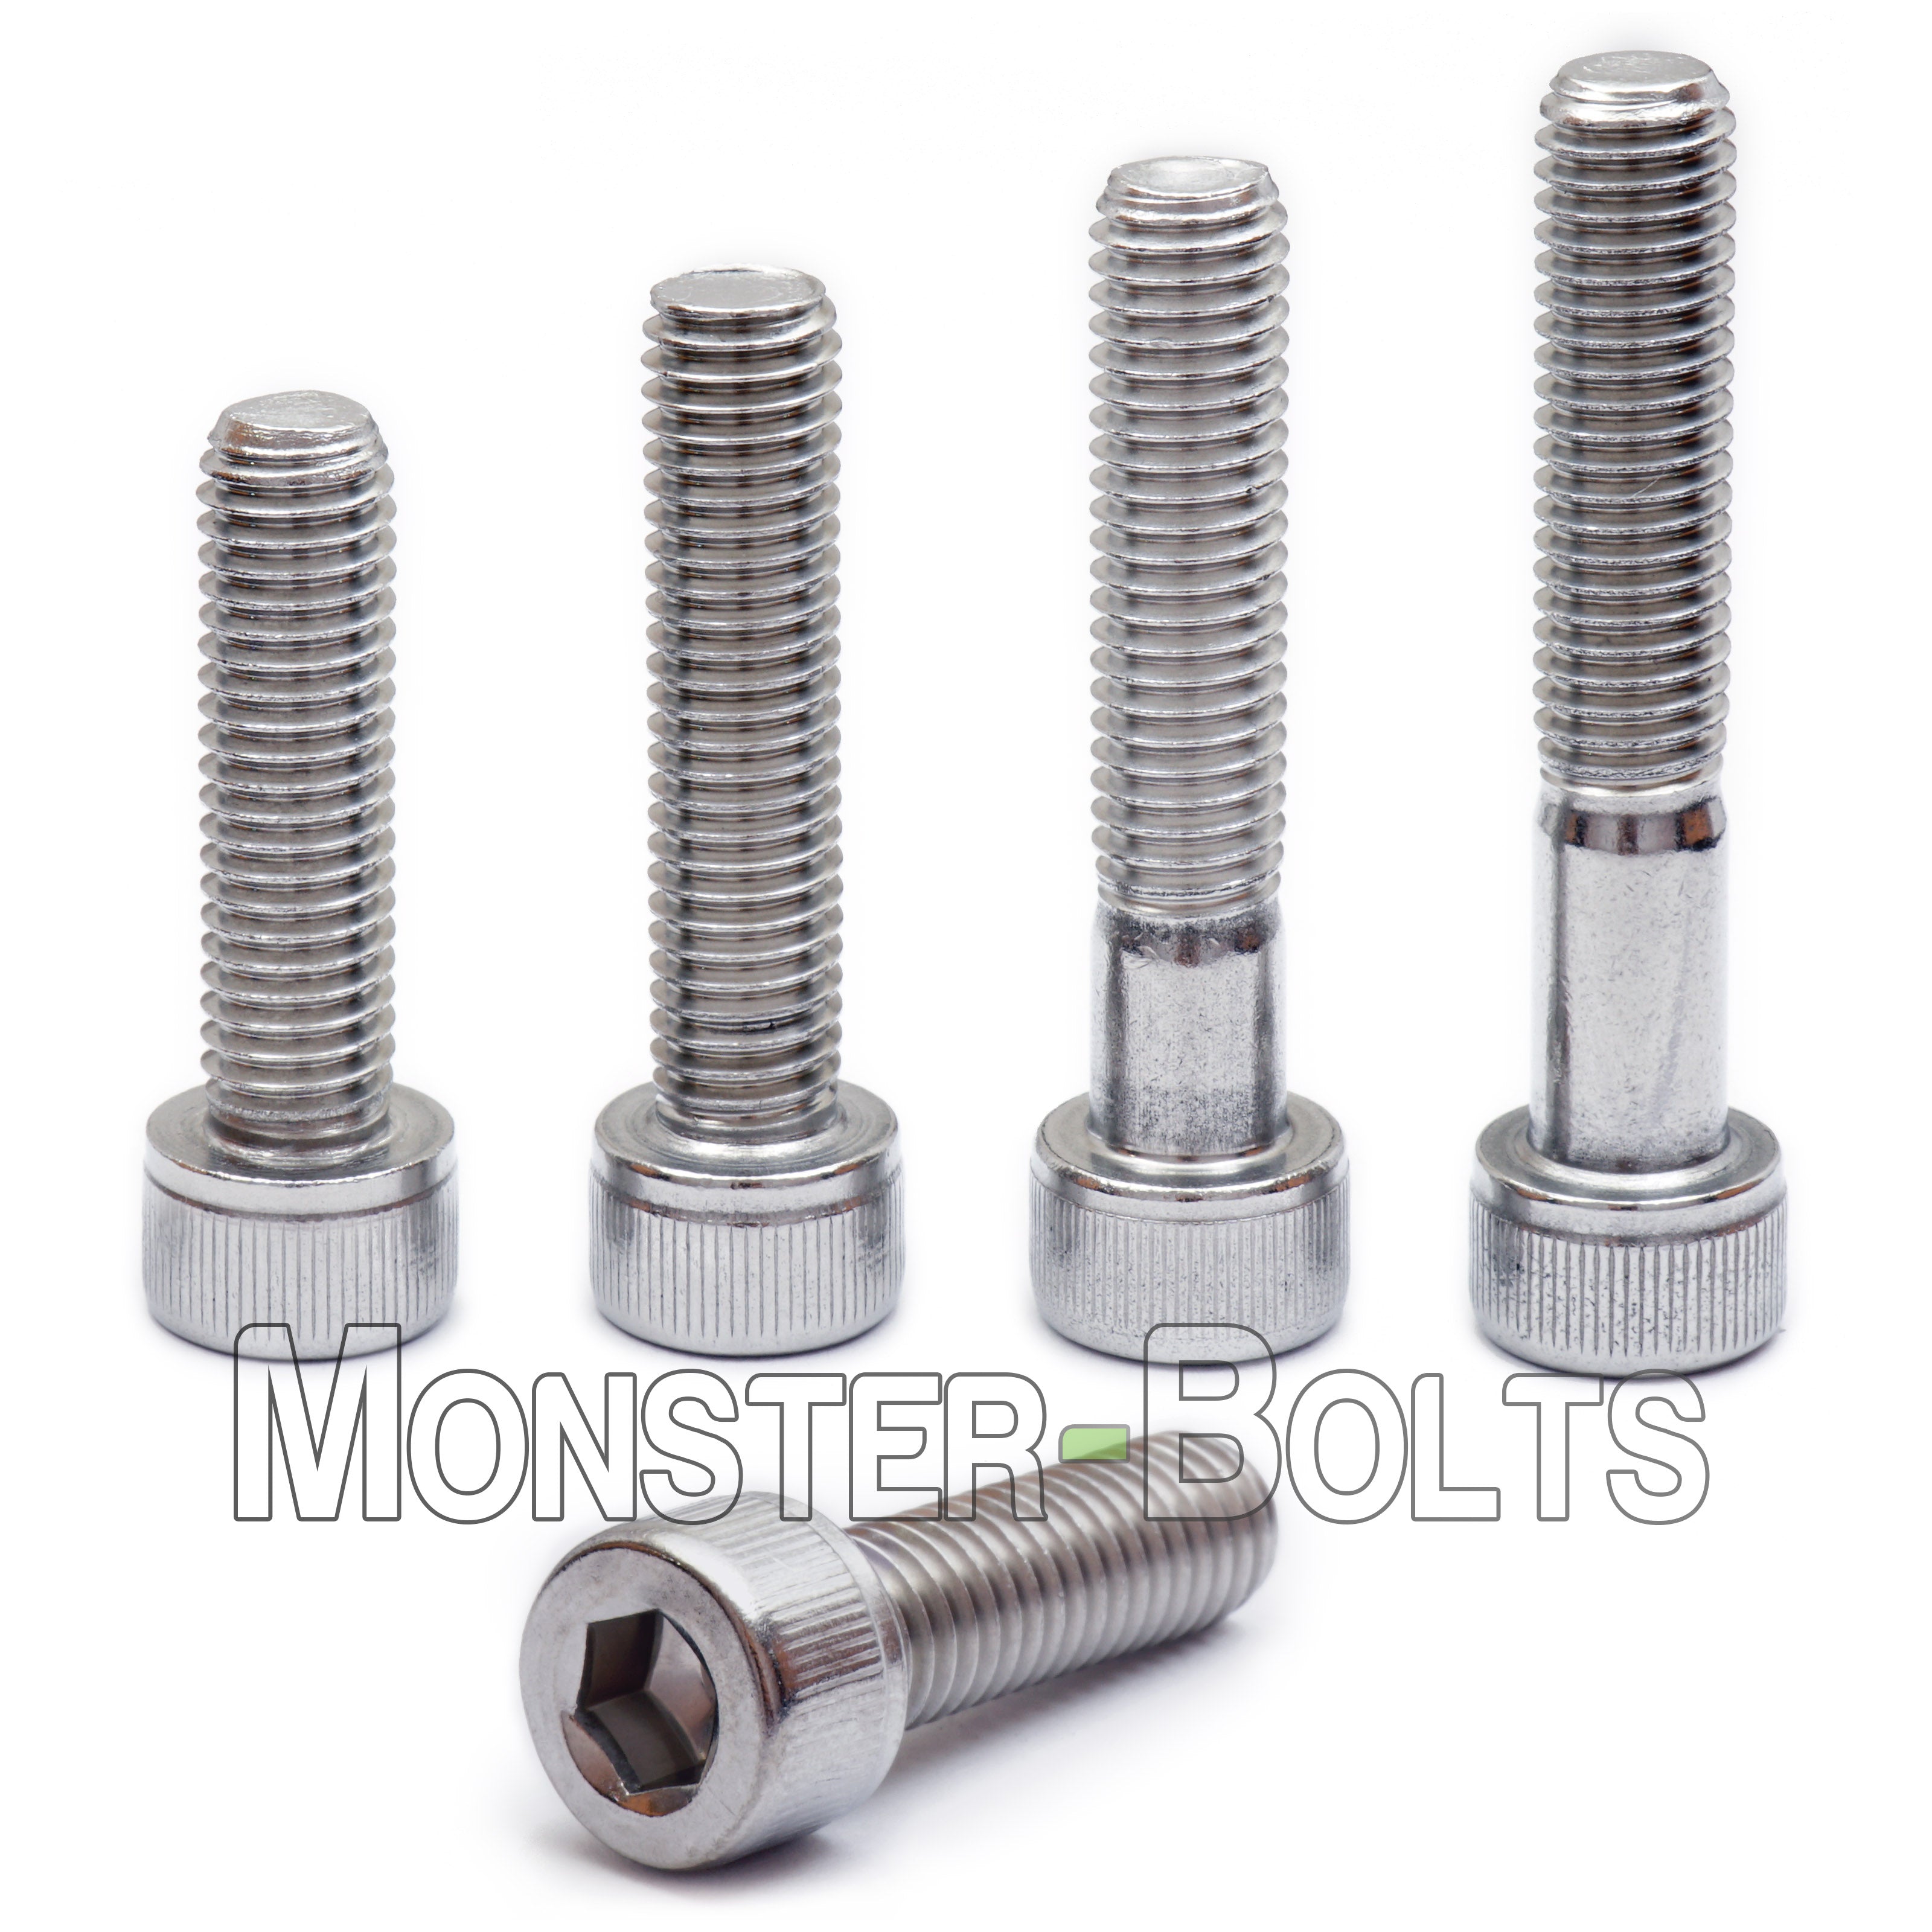 Hex Flange Serrated Cap Bolt Screws 18-8 Stainless Steel 4-20 x Qty 25 - 2